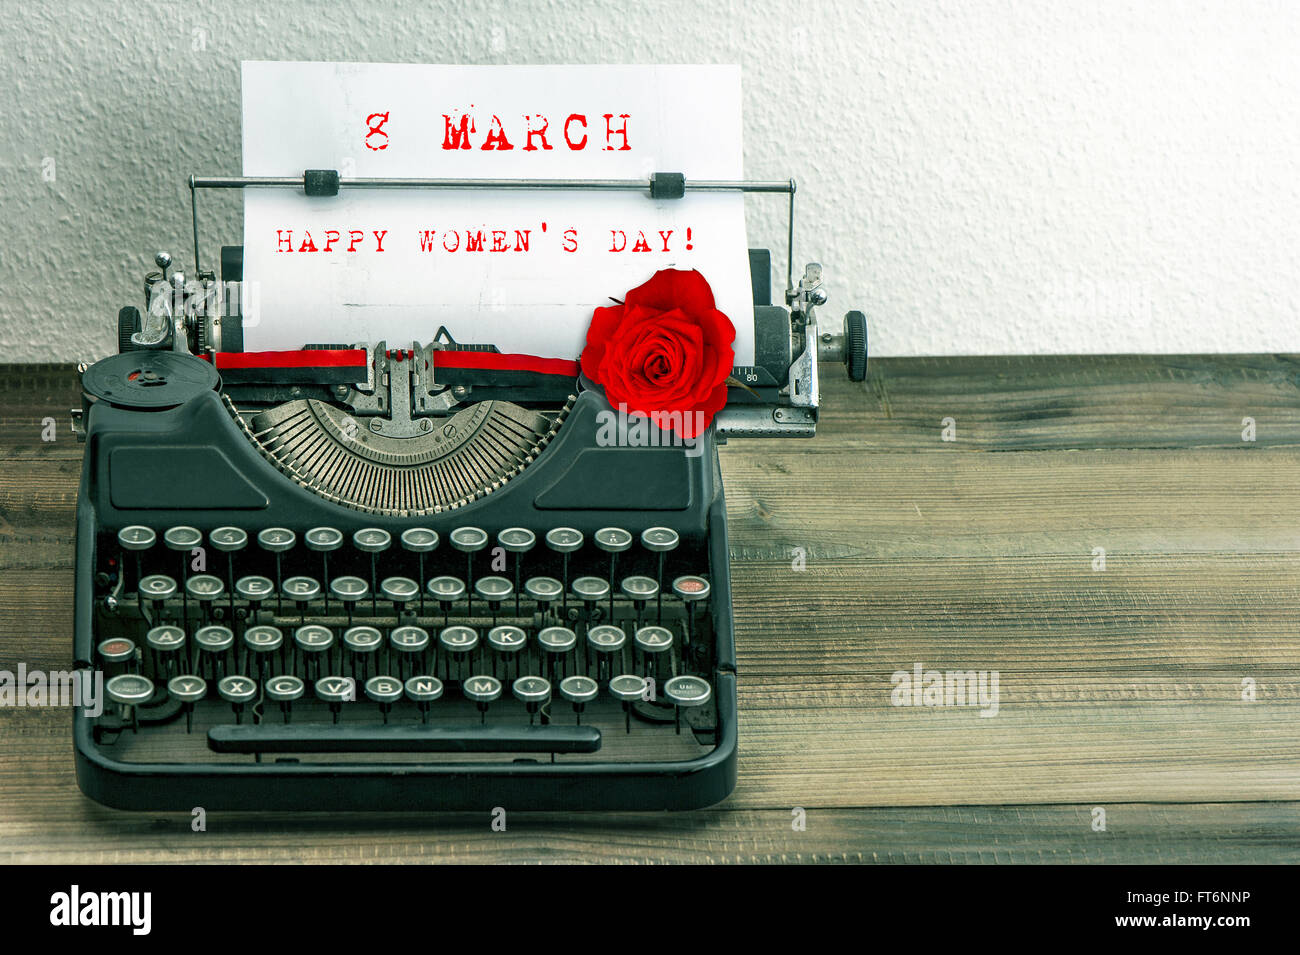 Happy Womens Day! Vintage typewriter with white paper page and red rose flower Stock Photo